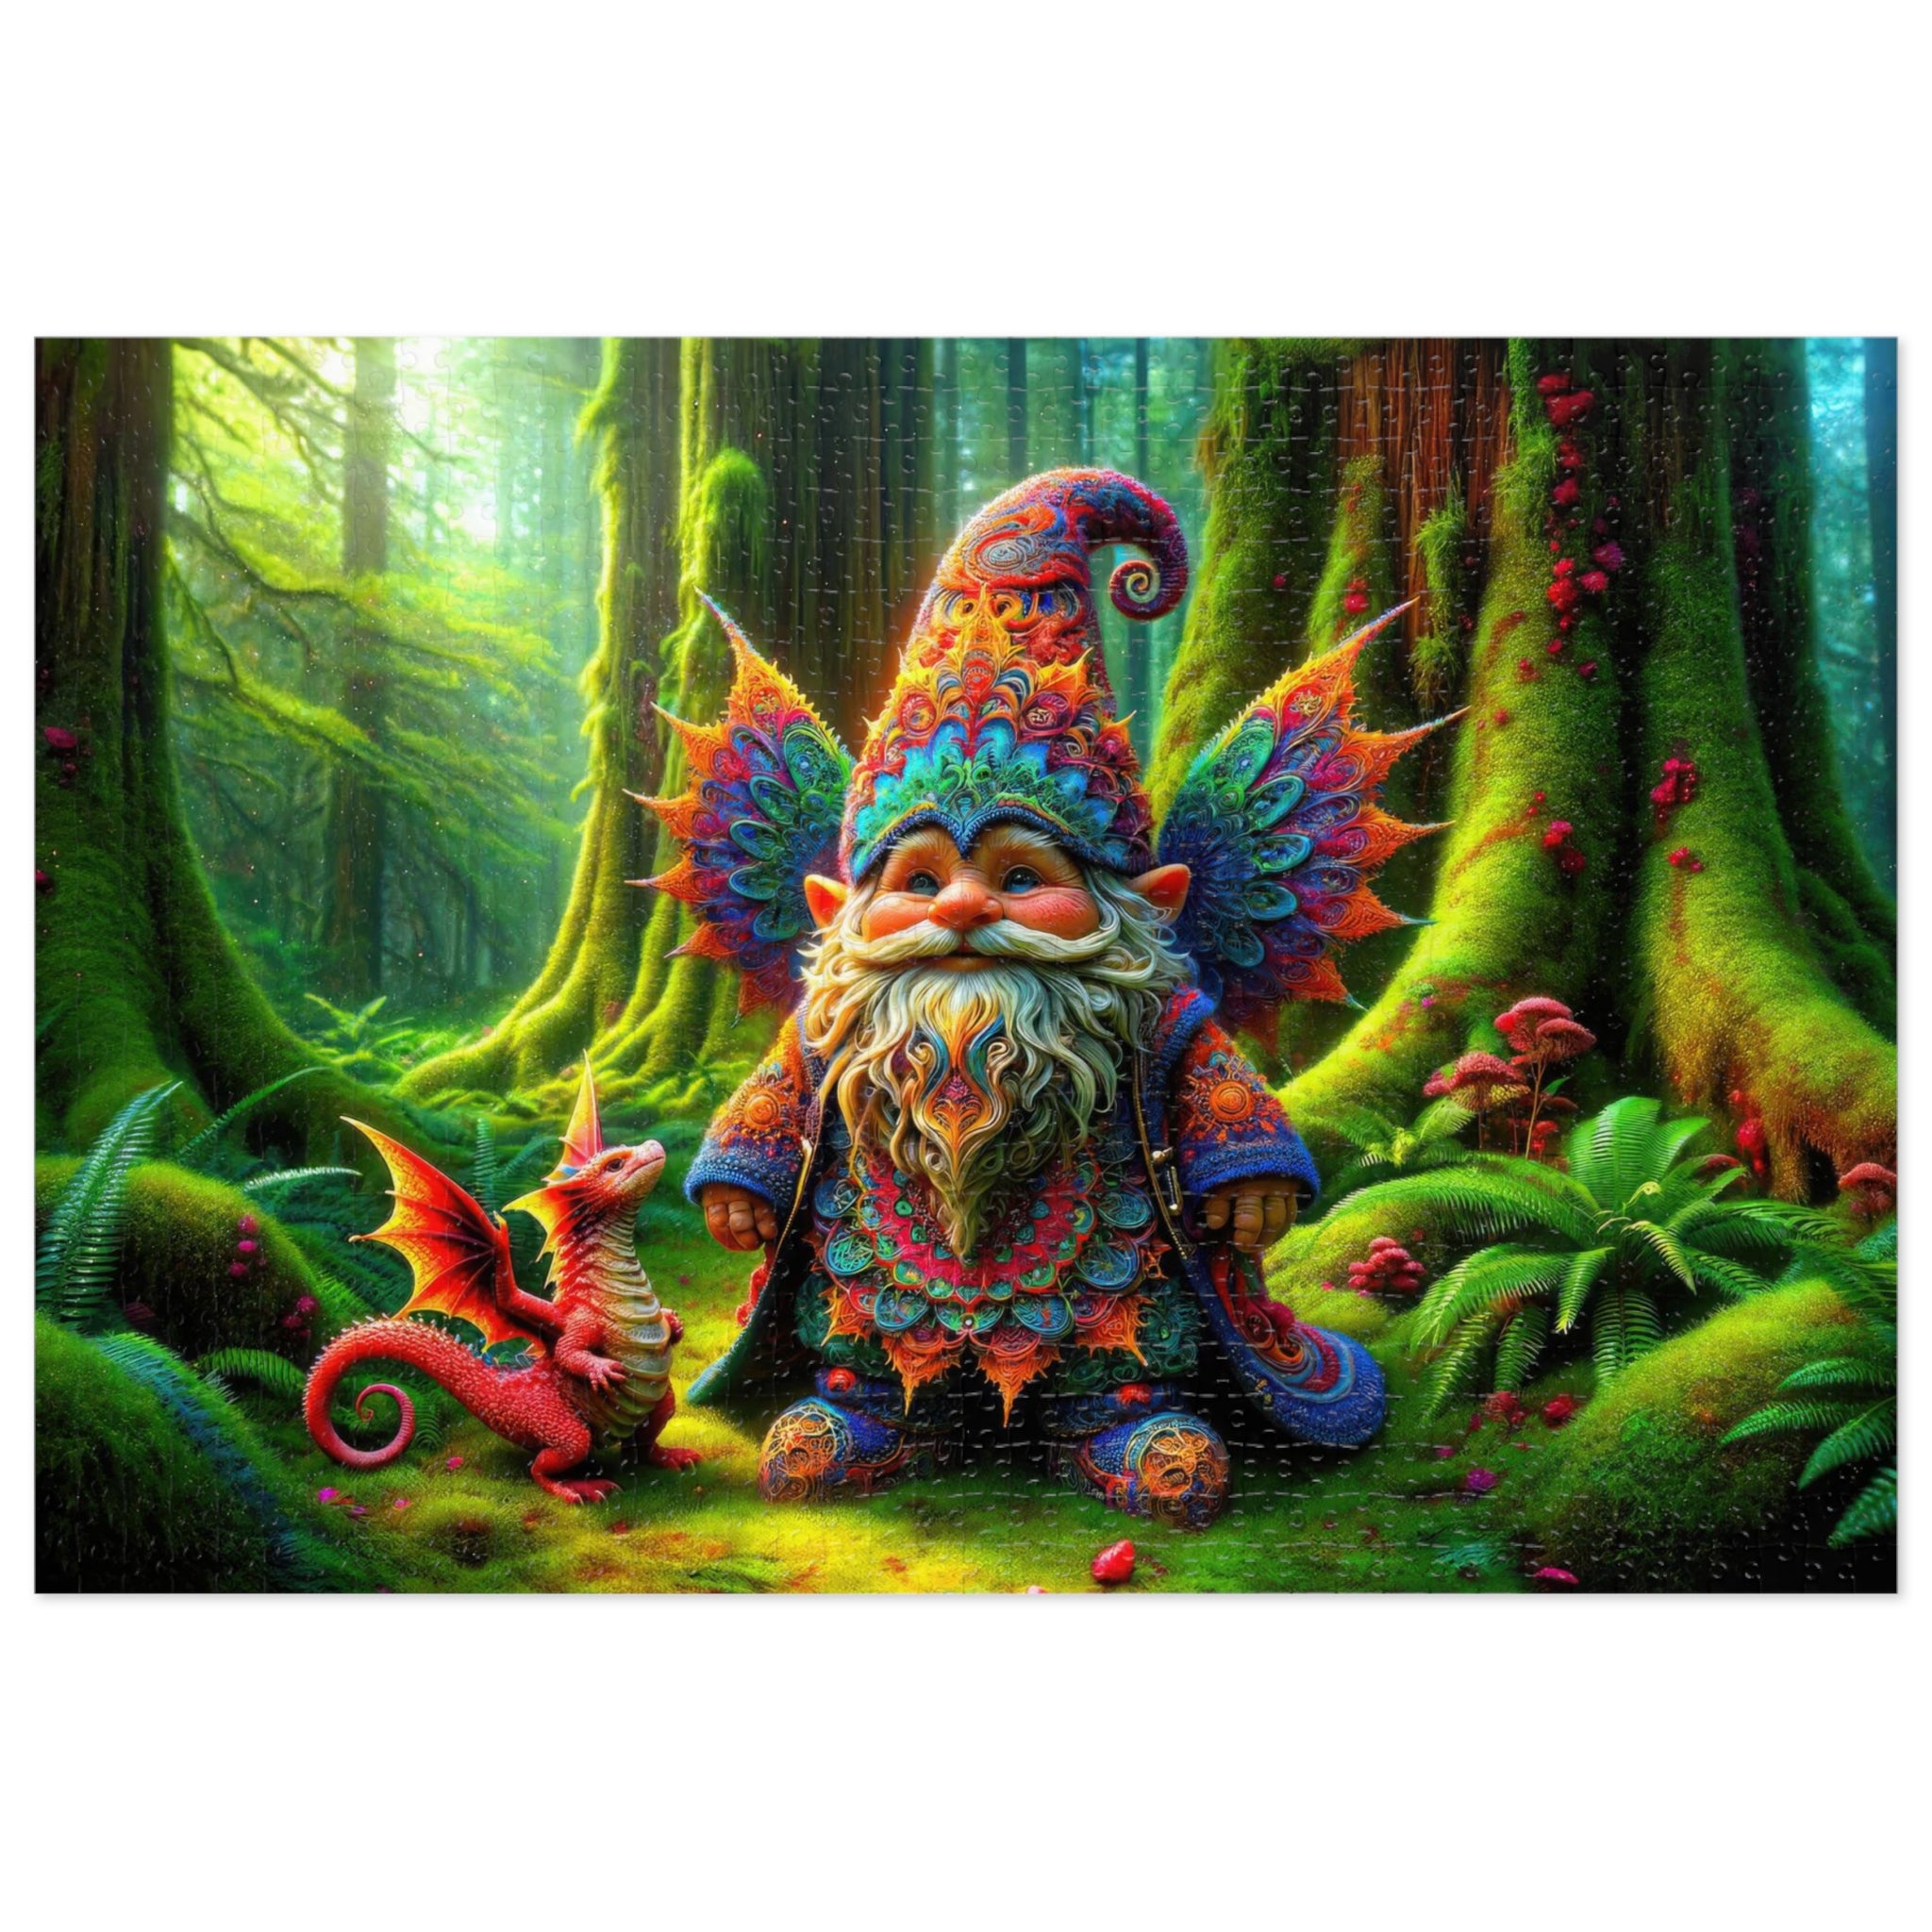 The Fractal Forest's Mystical Mentor Jigsaw Puzzle